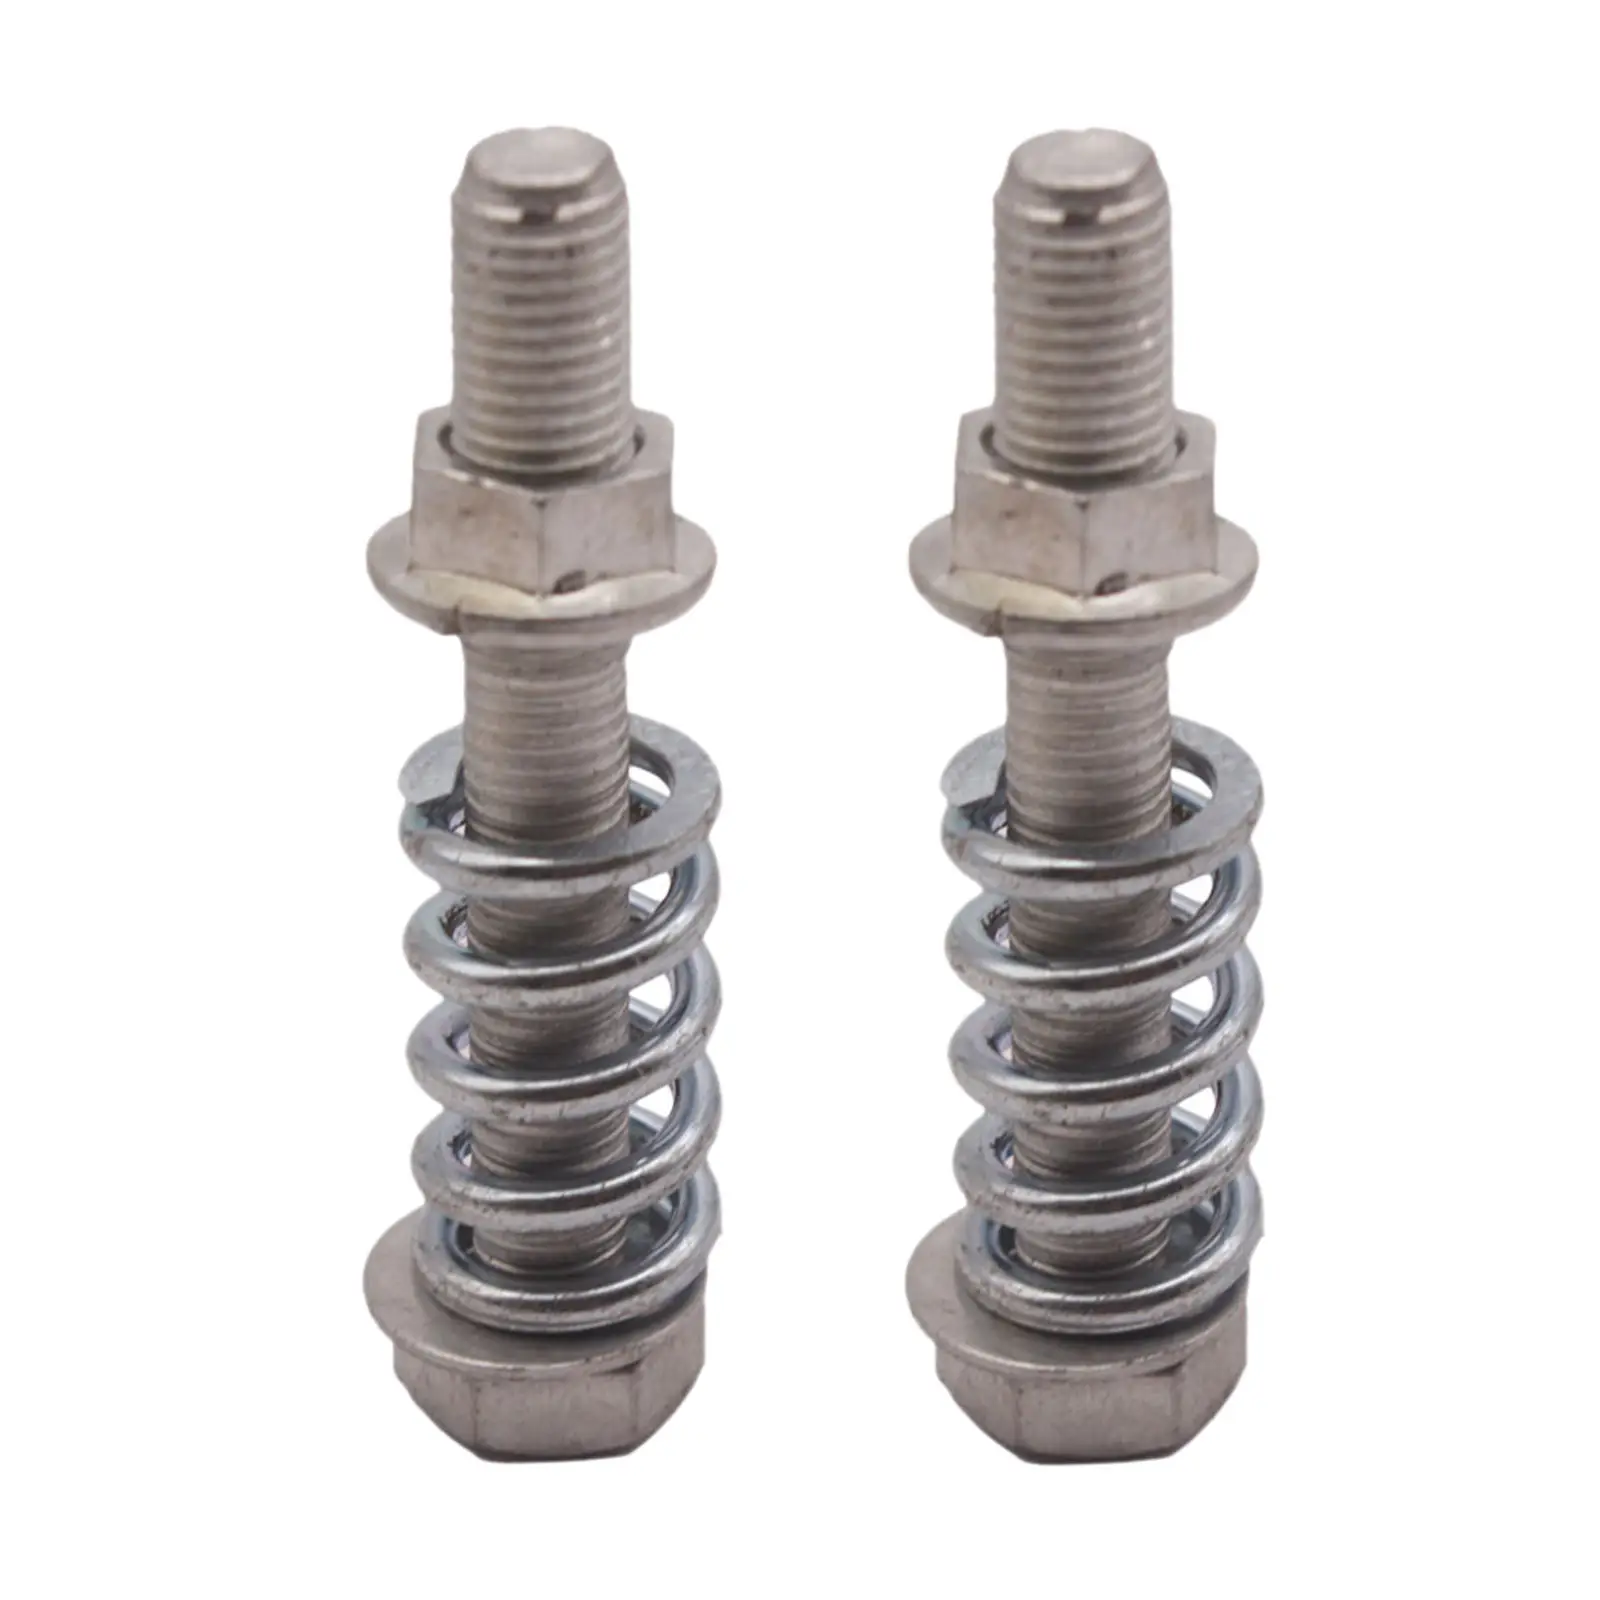 2Pcs M10x1.5 Exhaust Bolt Spring Stud Hardware Kit Replacement Accessories